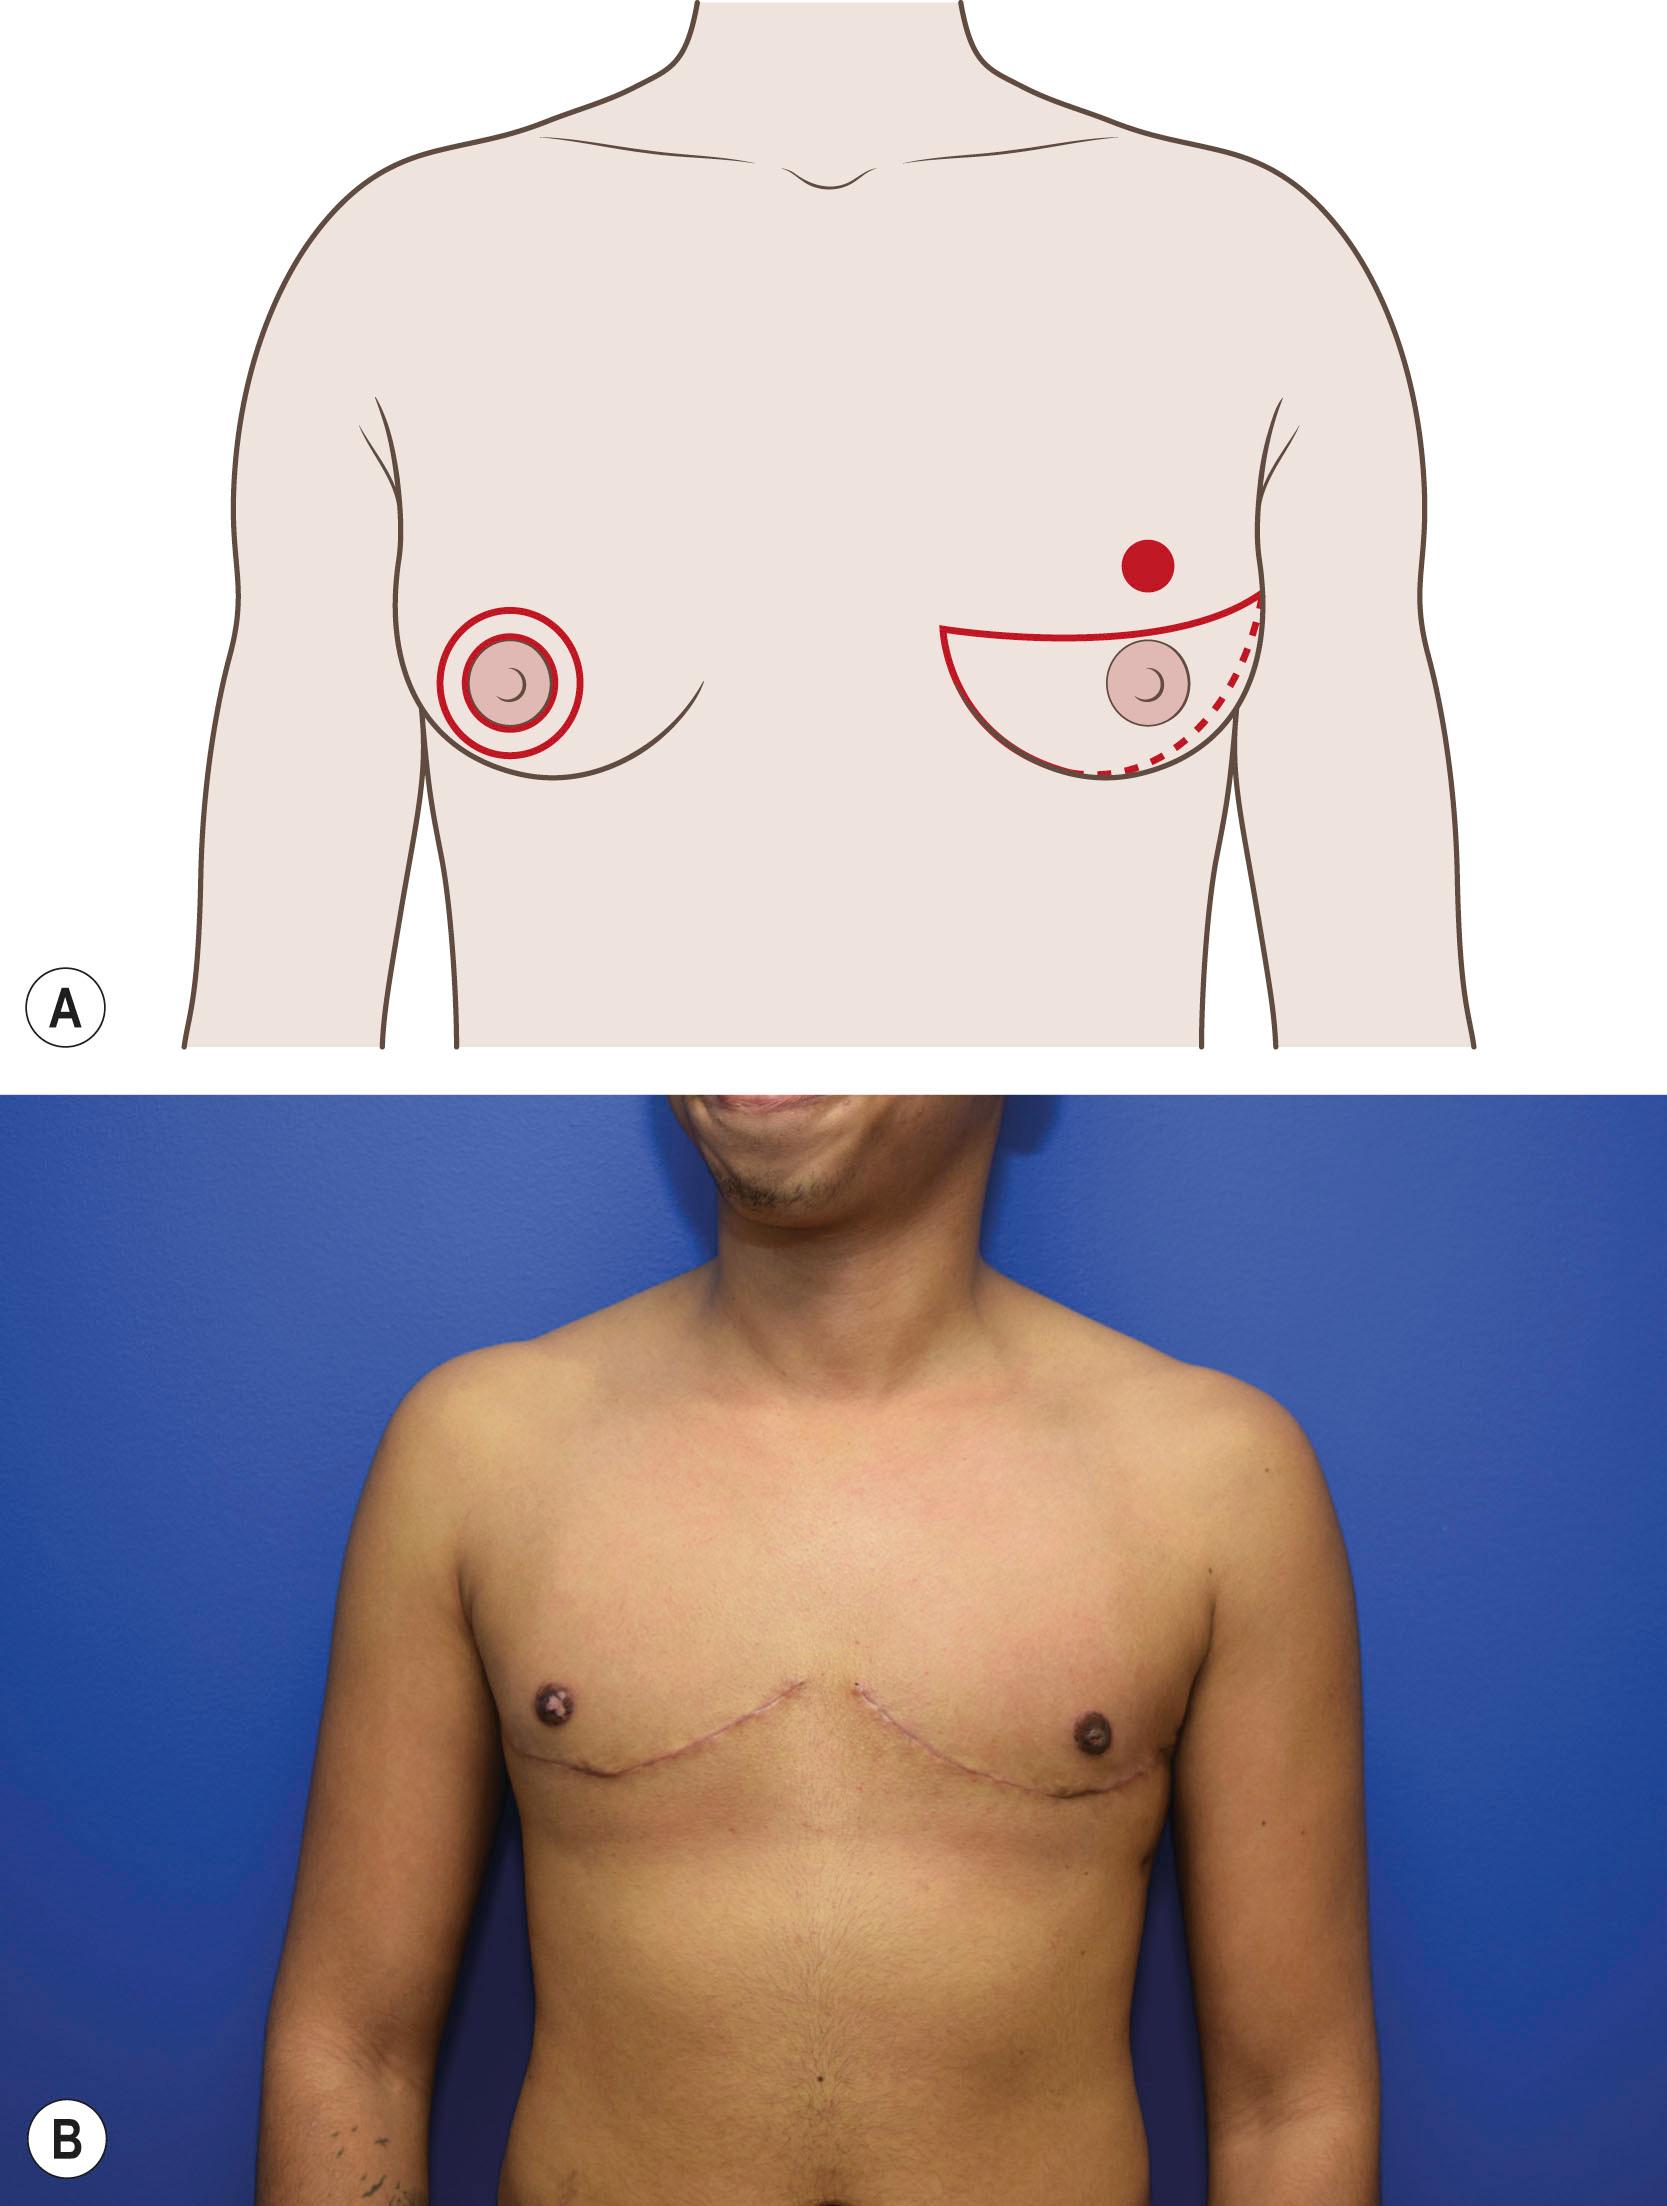 Figure 39.3, Preoperative markings for mastectomy. (A) Preoperative markings for mastectomy: double incision and free nipple graft markings (patient left) and circumareolar markings. (B) Surgical outcomes after mastectomy with double incision and free nipple graft. Note areolar depigmentation (6 months follow-up).